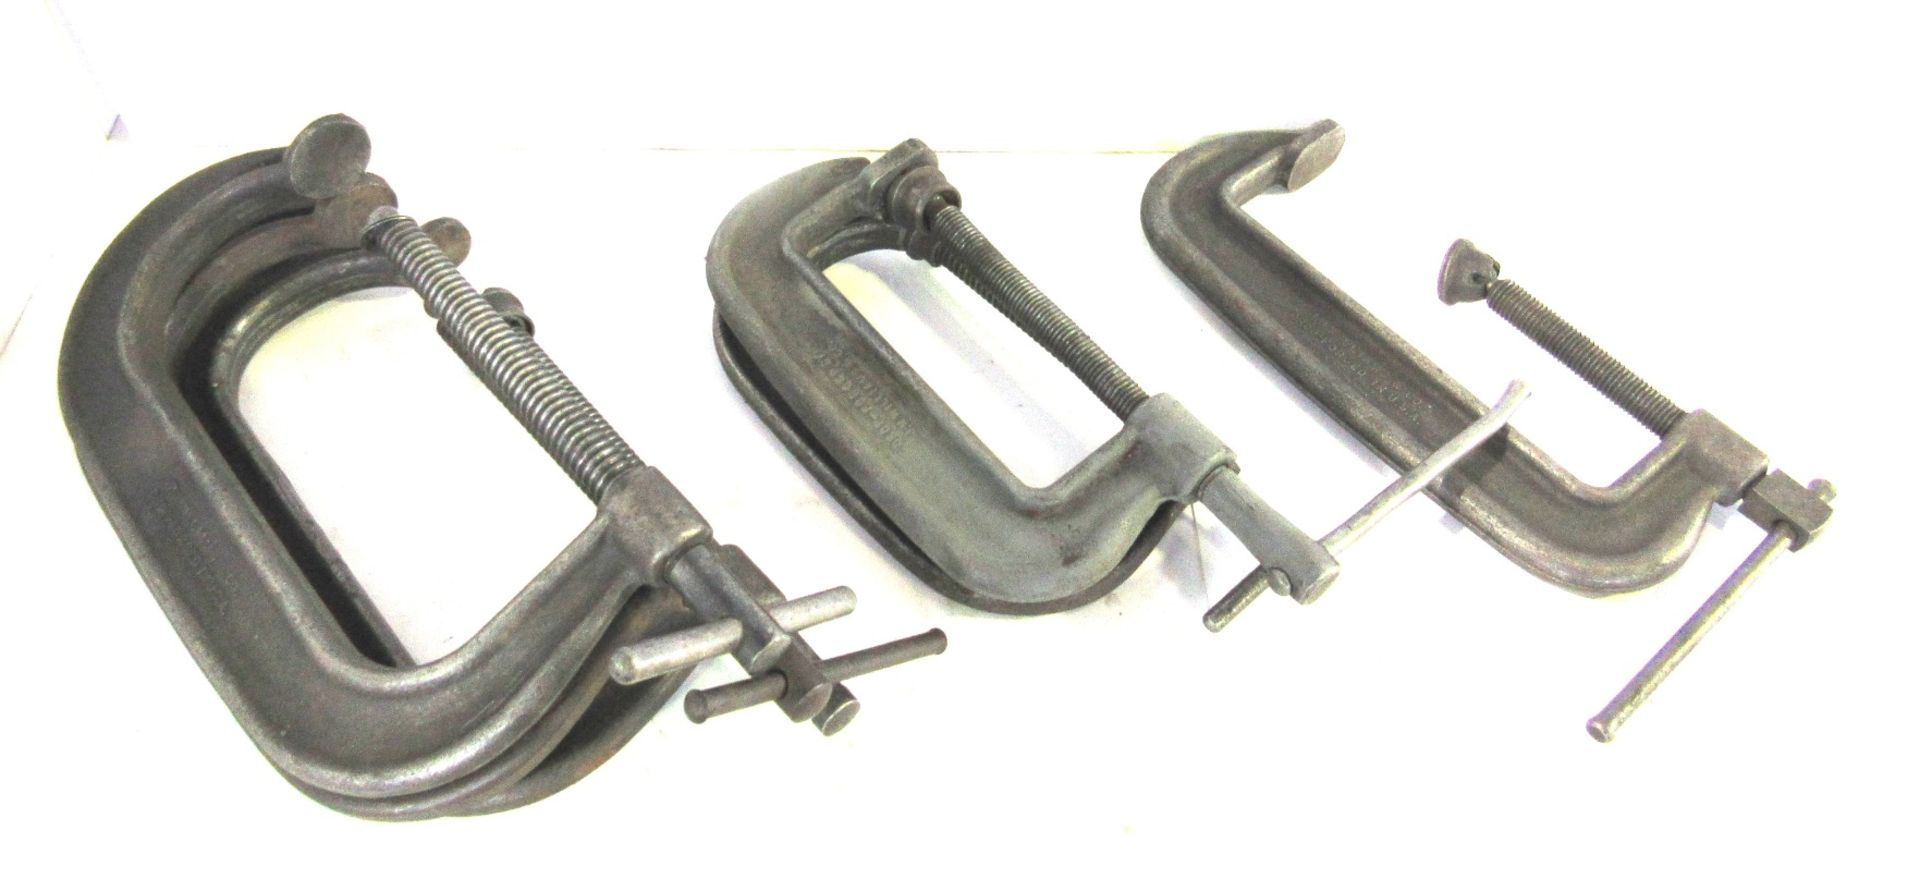 (6) Assorted Armstrong C-Clamps